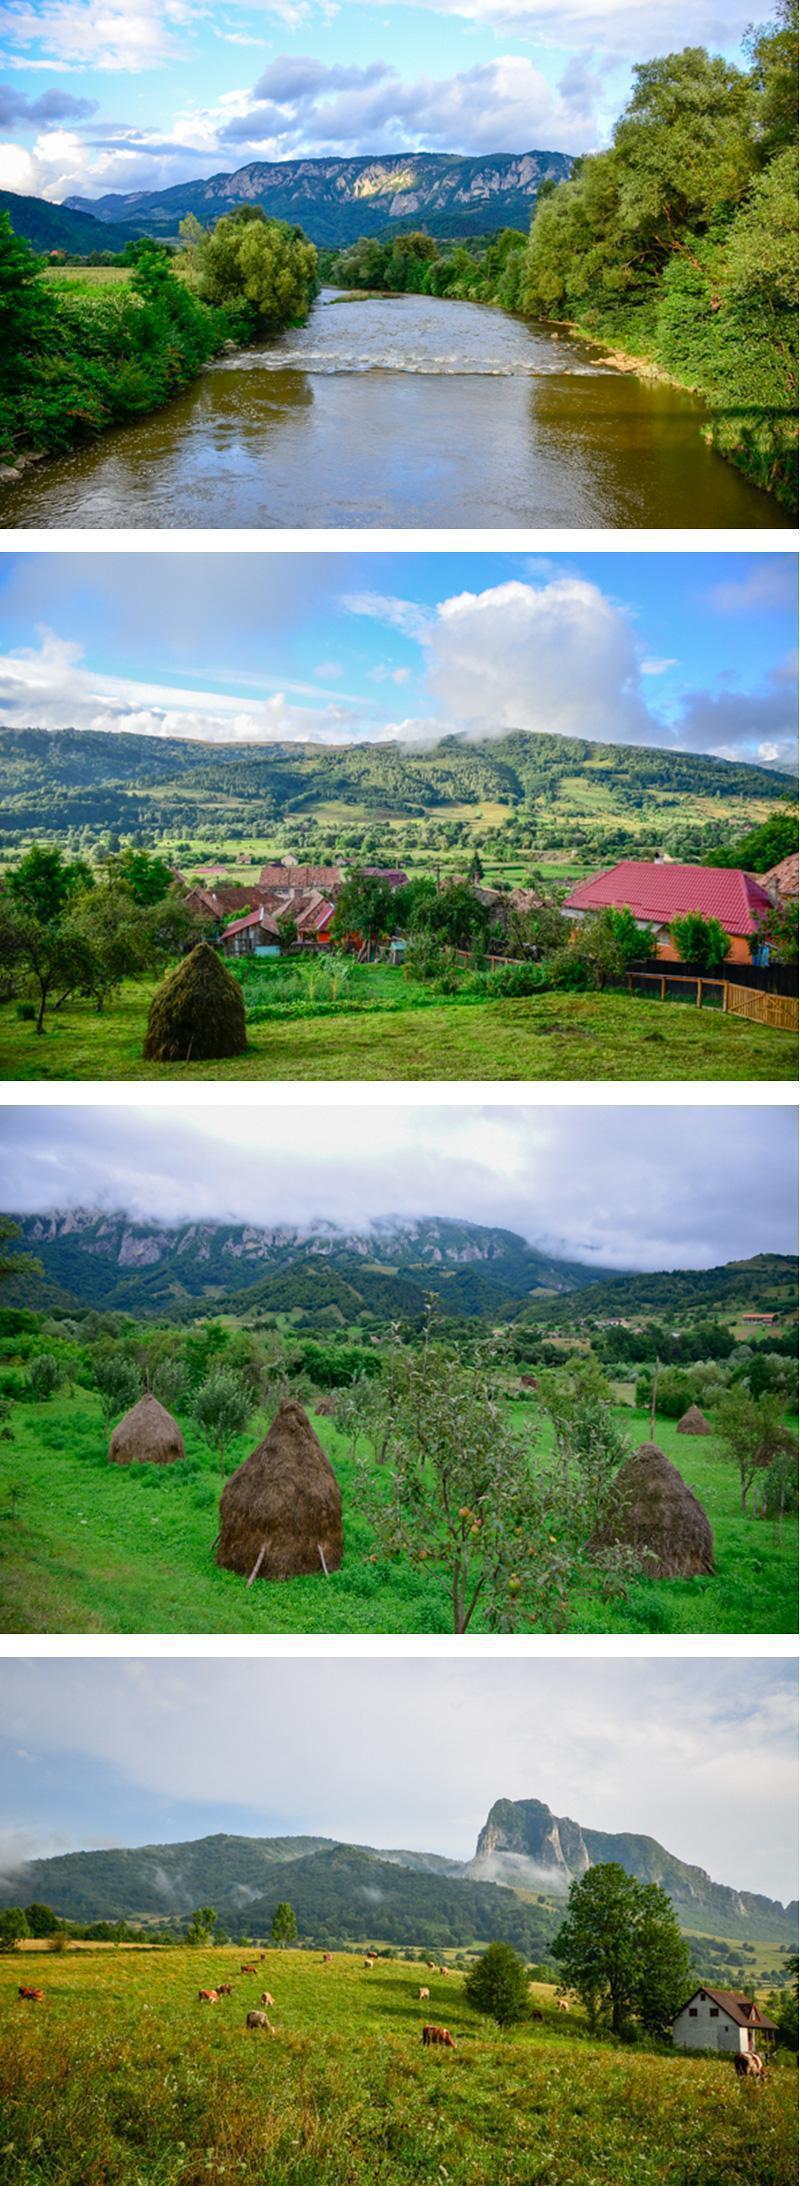 Imagine staying in a rural pension with a Romanian family in these stunning country landscapes, in Transylvania!